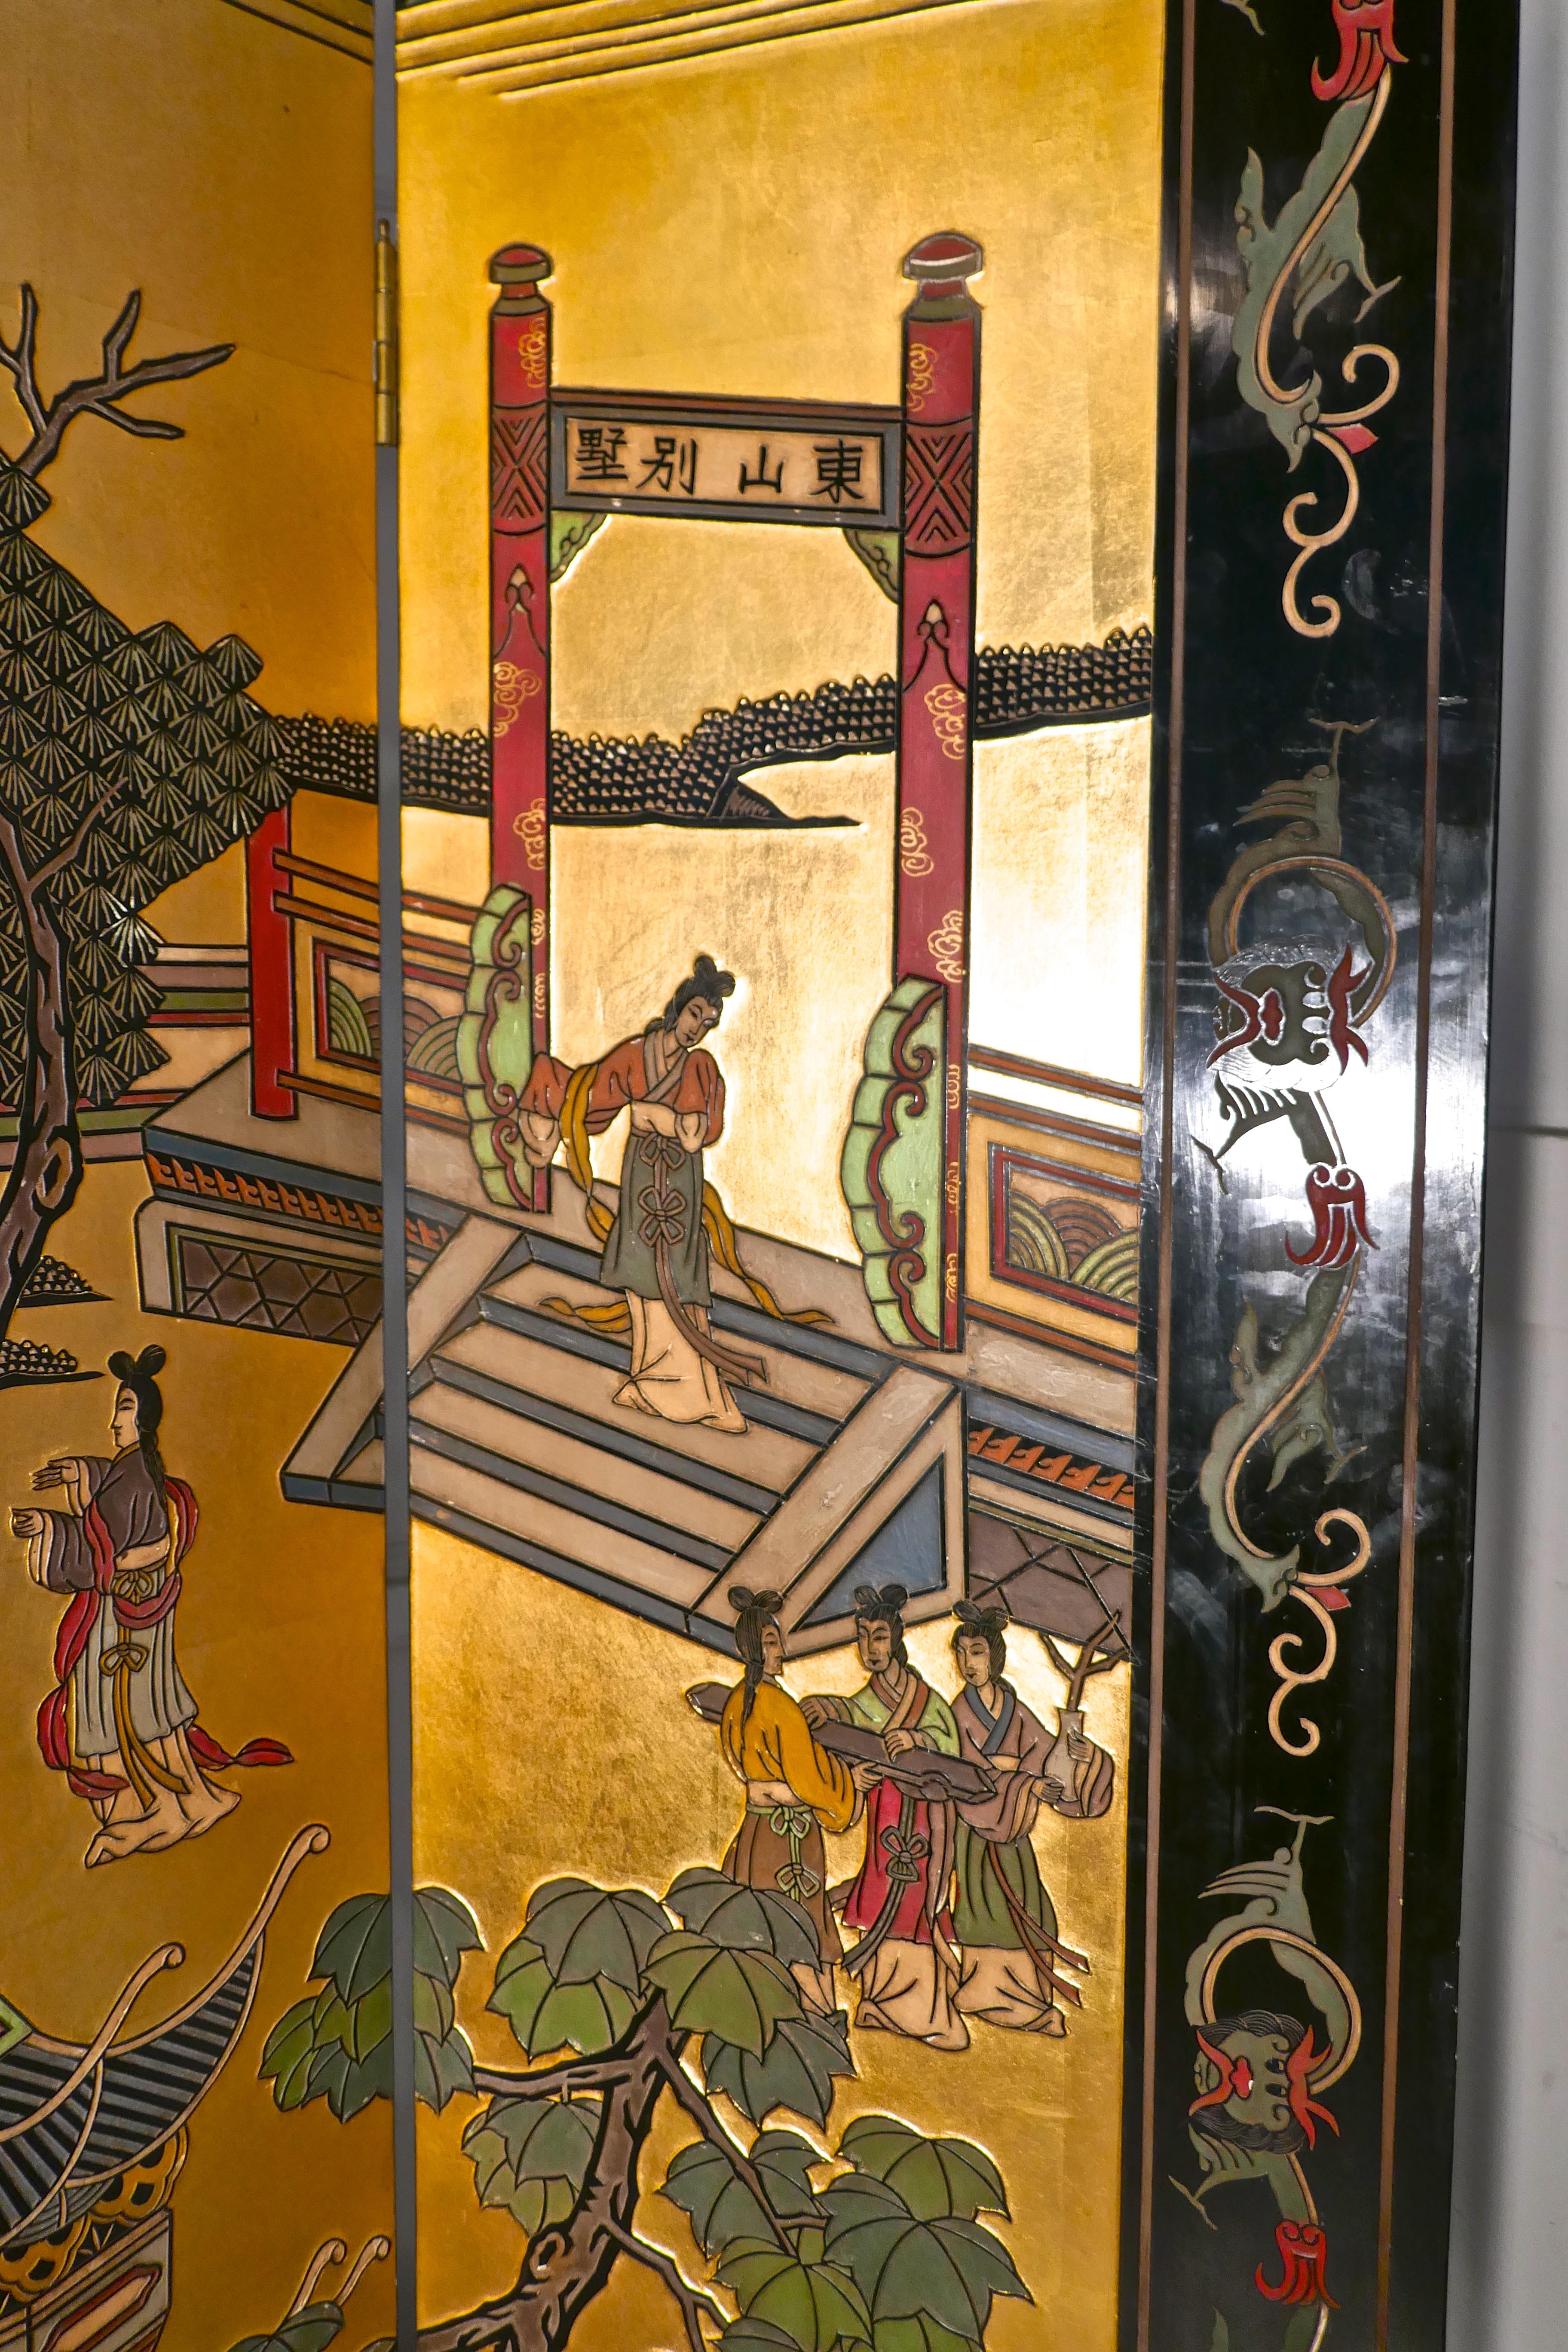 Large heavy decorated Japanese lacquer room divider screen

This impressive screen has four superbly decorated panels, if the screen is opened flat the picture on one side continues through the panels. The picture show an outdoor scene with